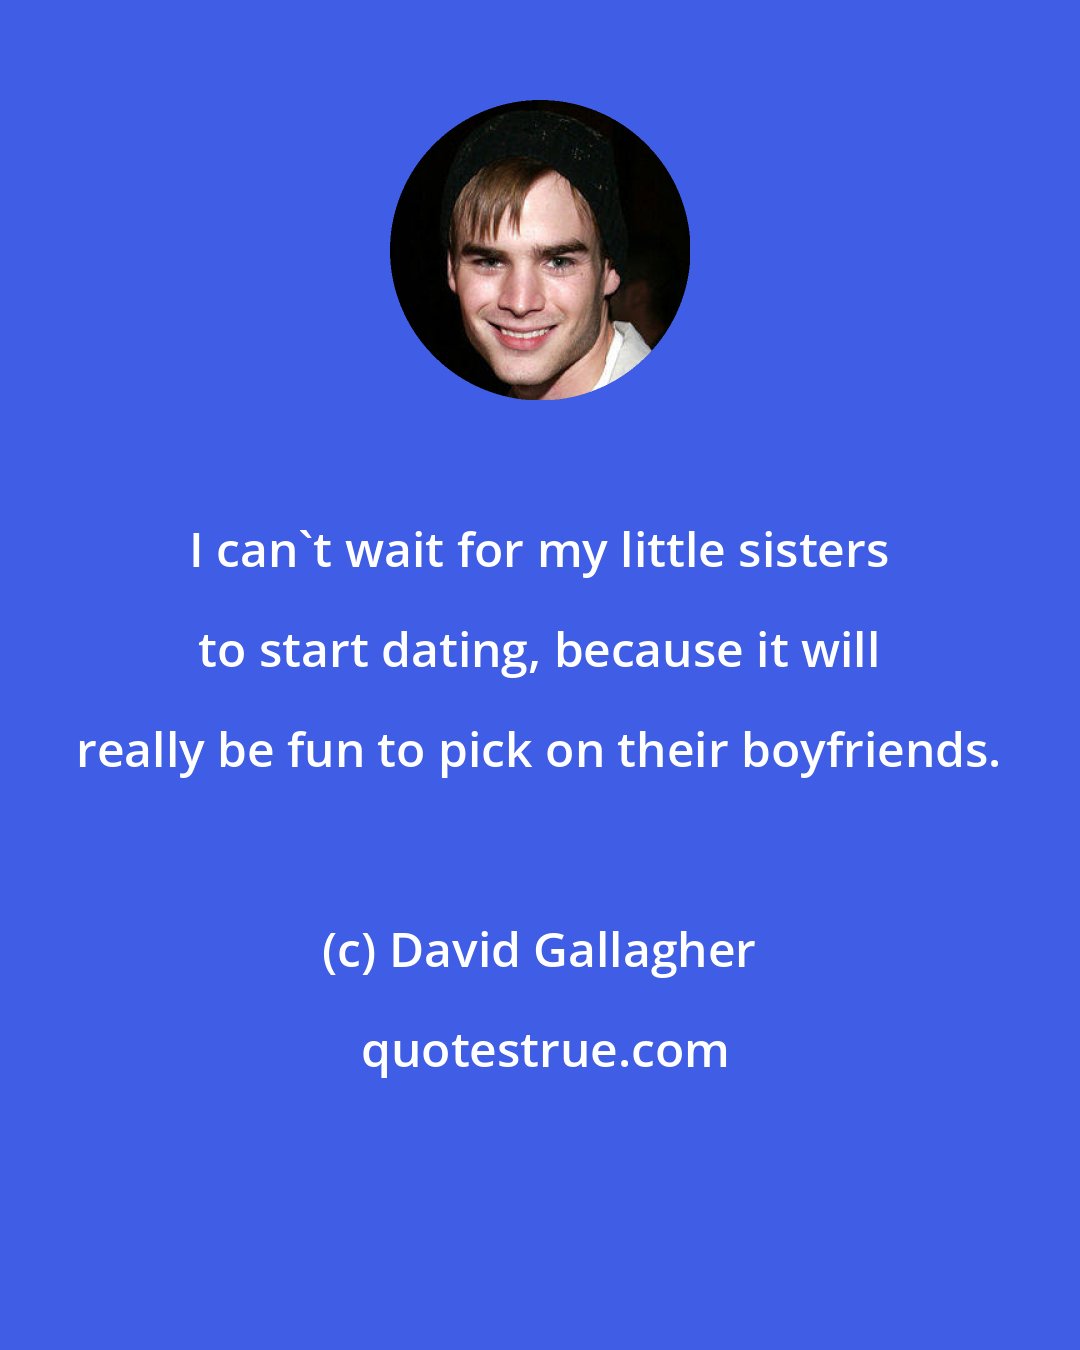 David Gallagher: I can't wait for my little sisters to start dating, because it will really be fun to pick on their boyfriends.